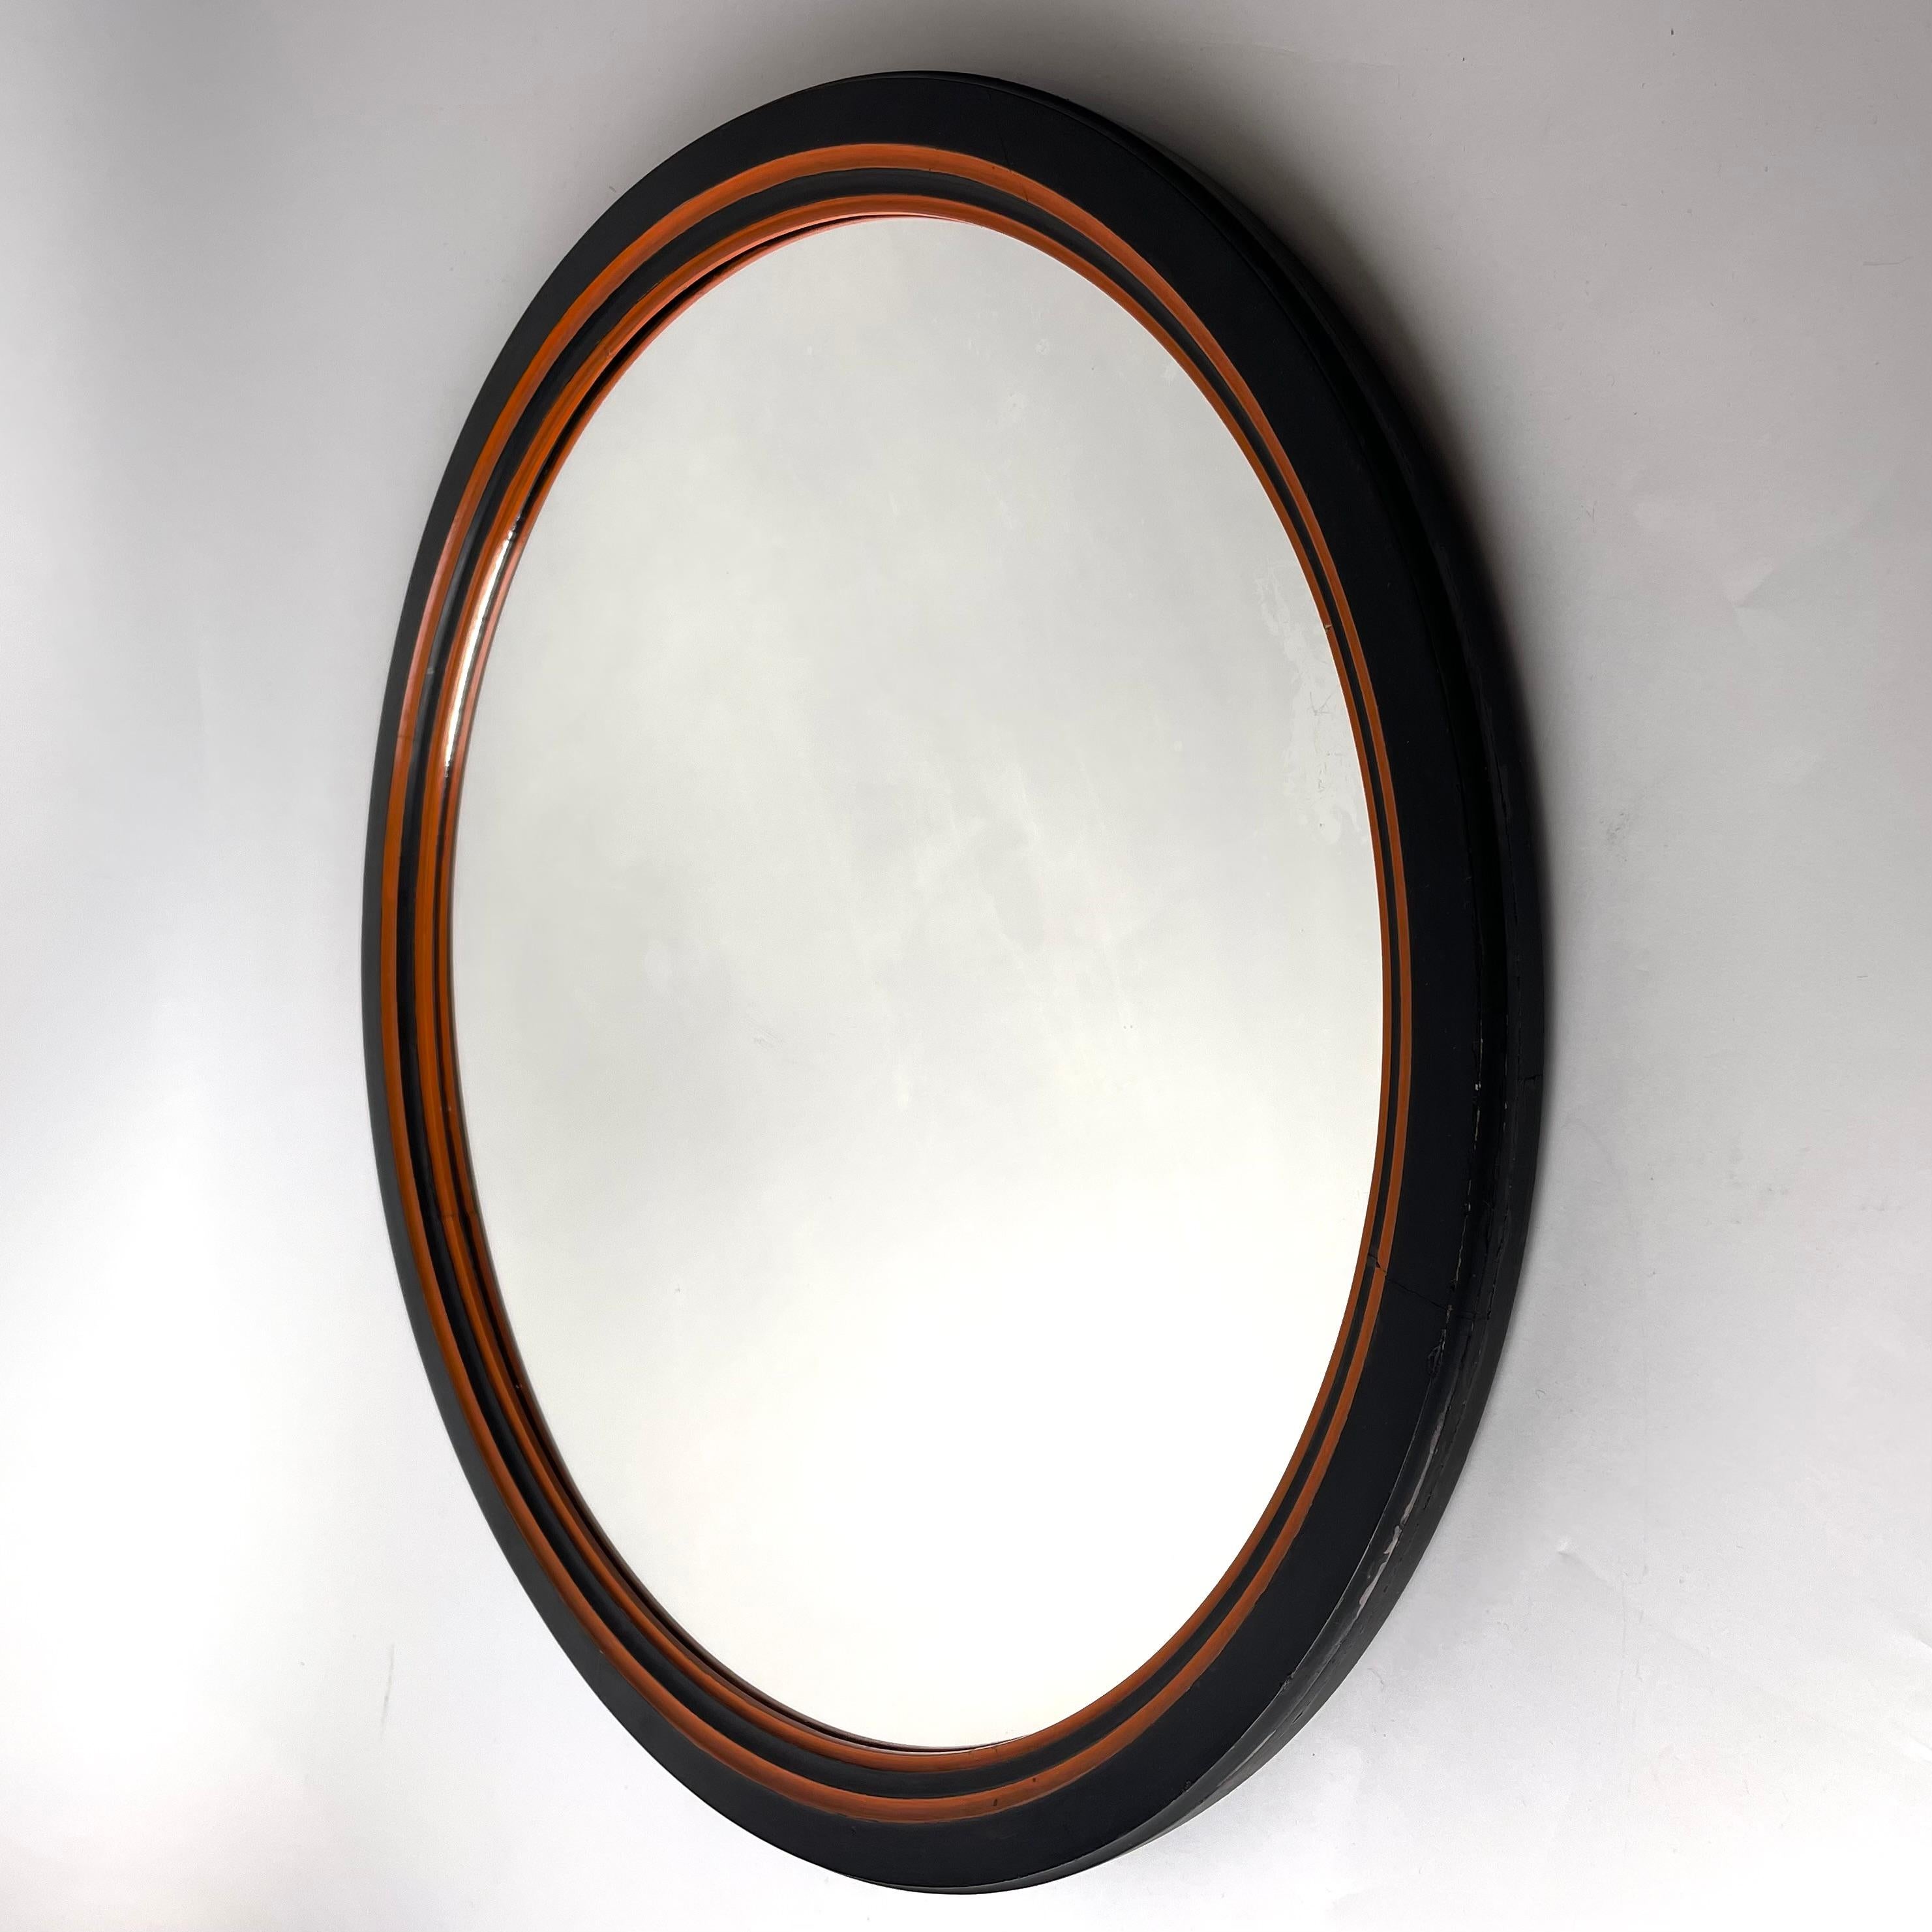 A Refined Art Deco/Swedish Grace Wall Mirror in Black and Orange Lacquered Birch, marked Wiholm Stockholm on back. Manufactured in Sweden during the interwar period (1920s-1930s) during the prominent Swedish Grace era of design. 

A beautifully